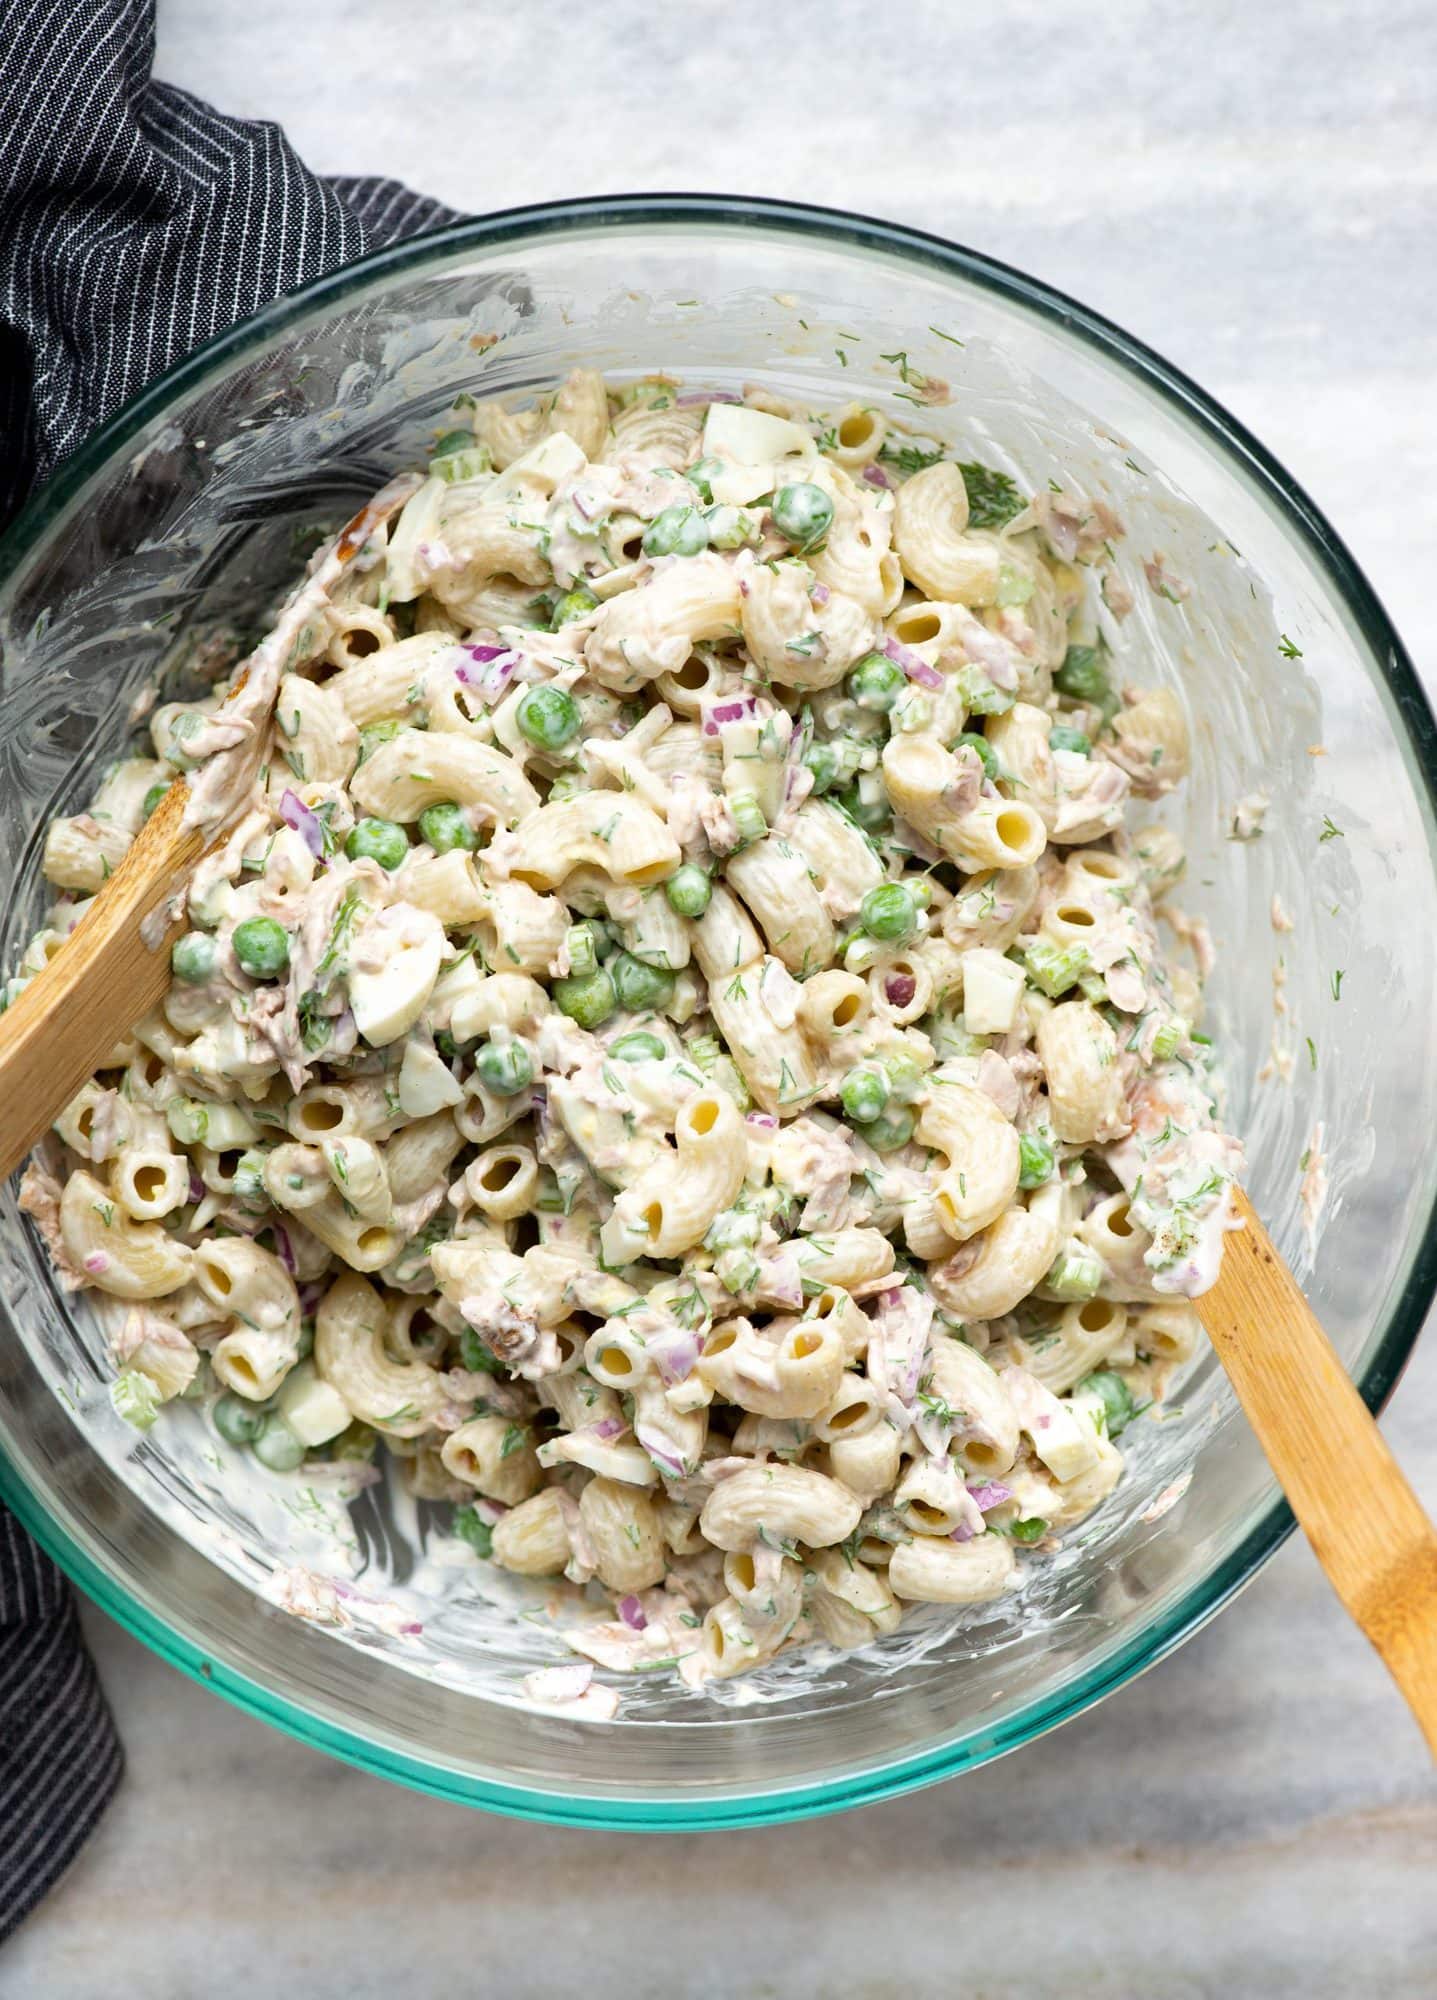 A bowl of tuna pasta salad done with a creamy dressing with two wooden spoons.